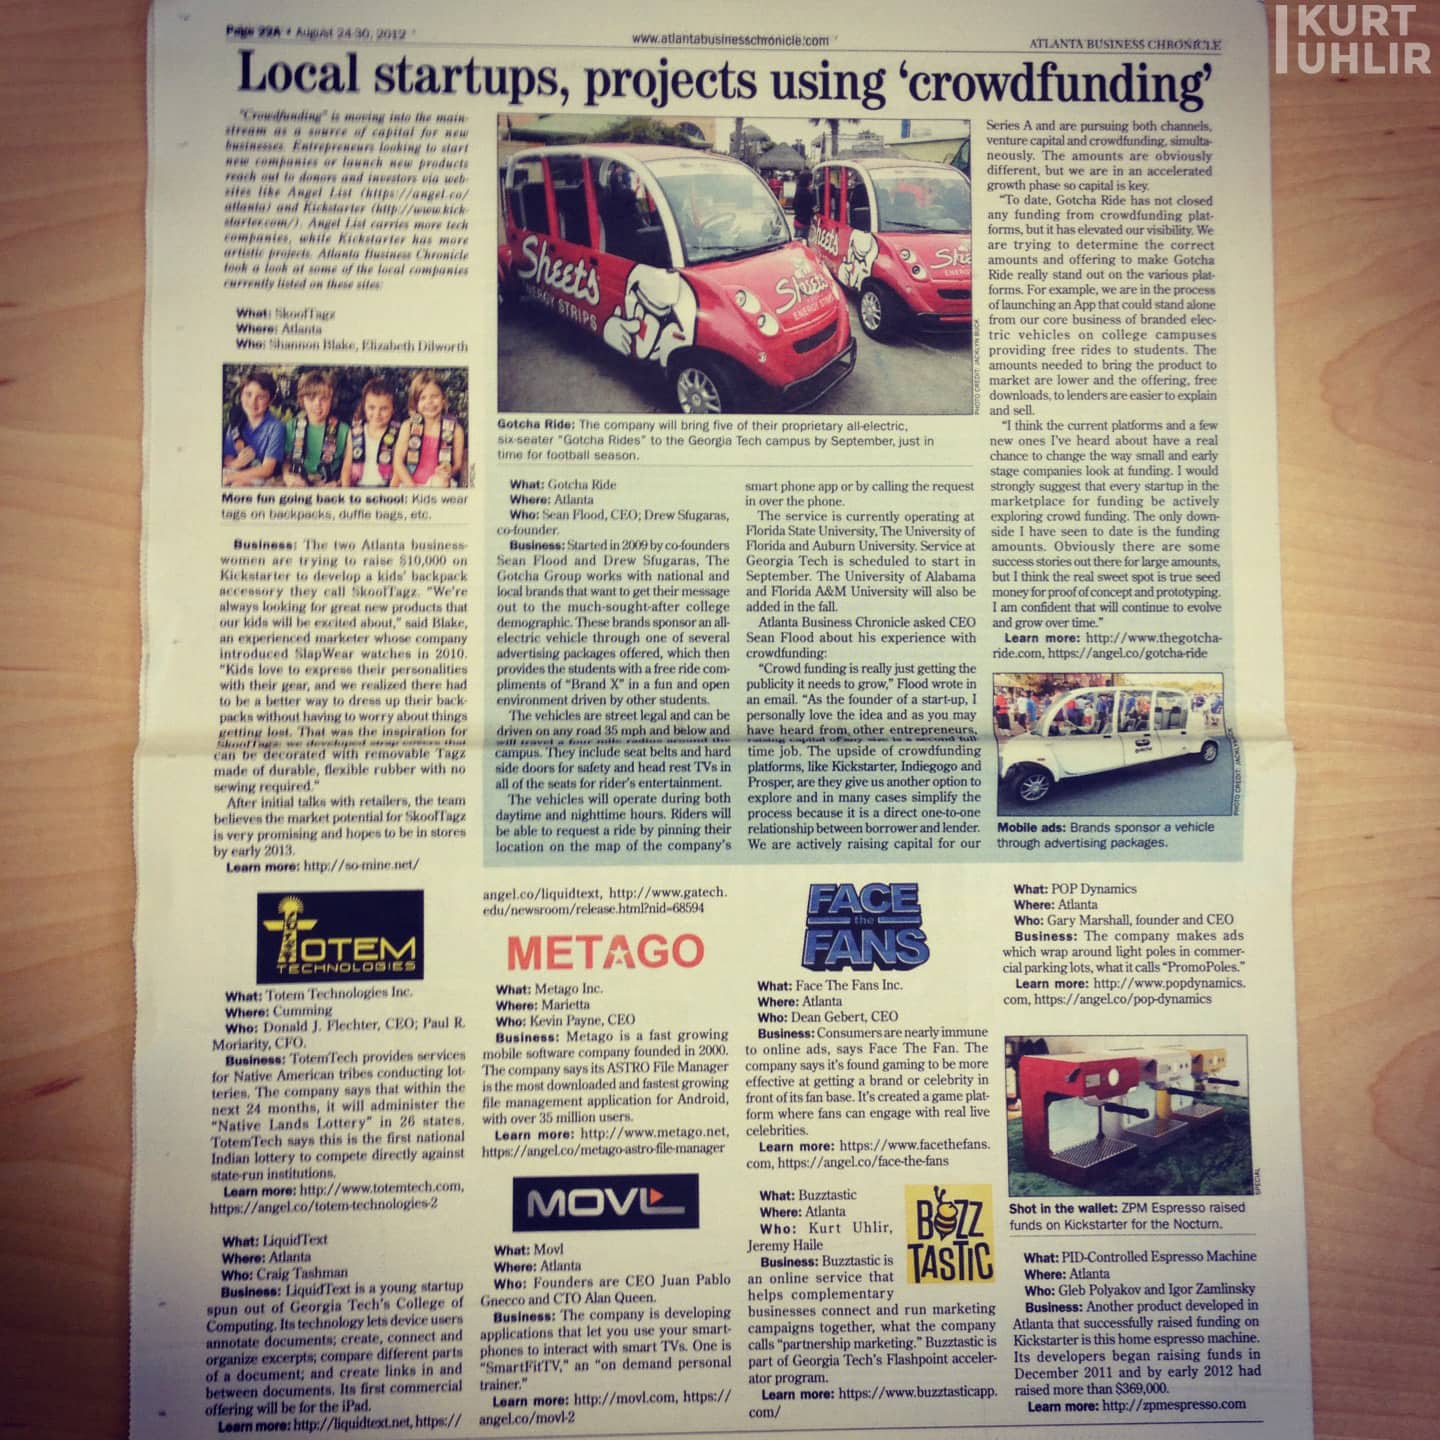 Mention in Atlanta Business Chronicle about funding about funding for Buzztastic (Sideqik)